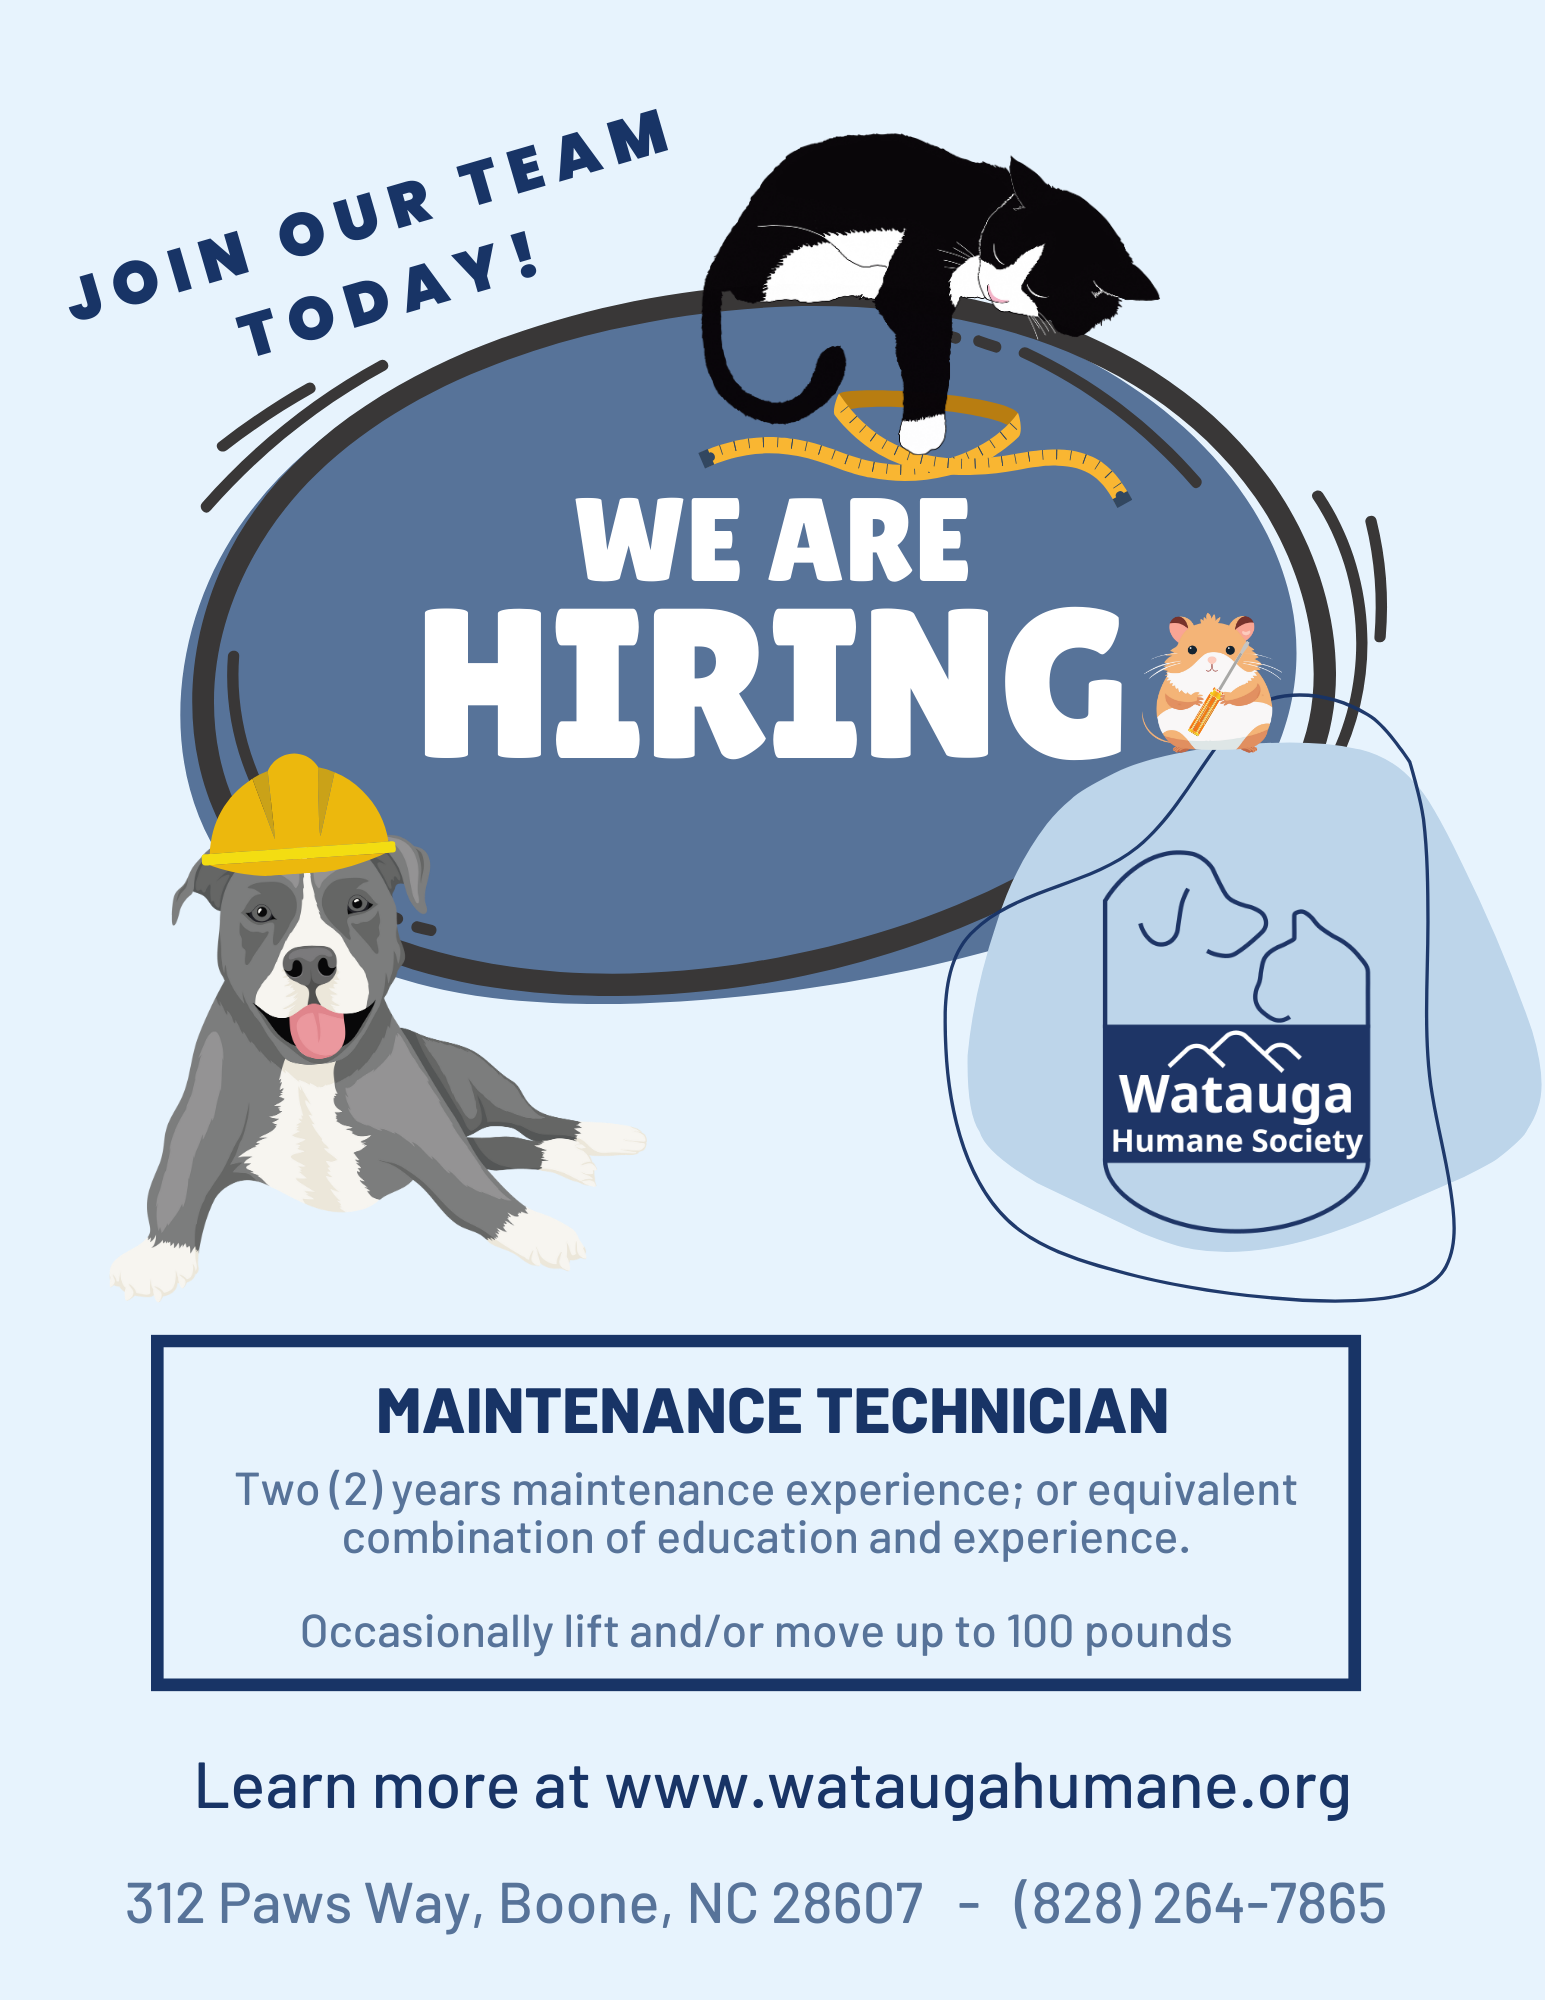 We are hiring!